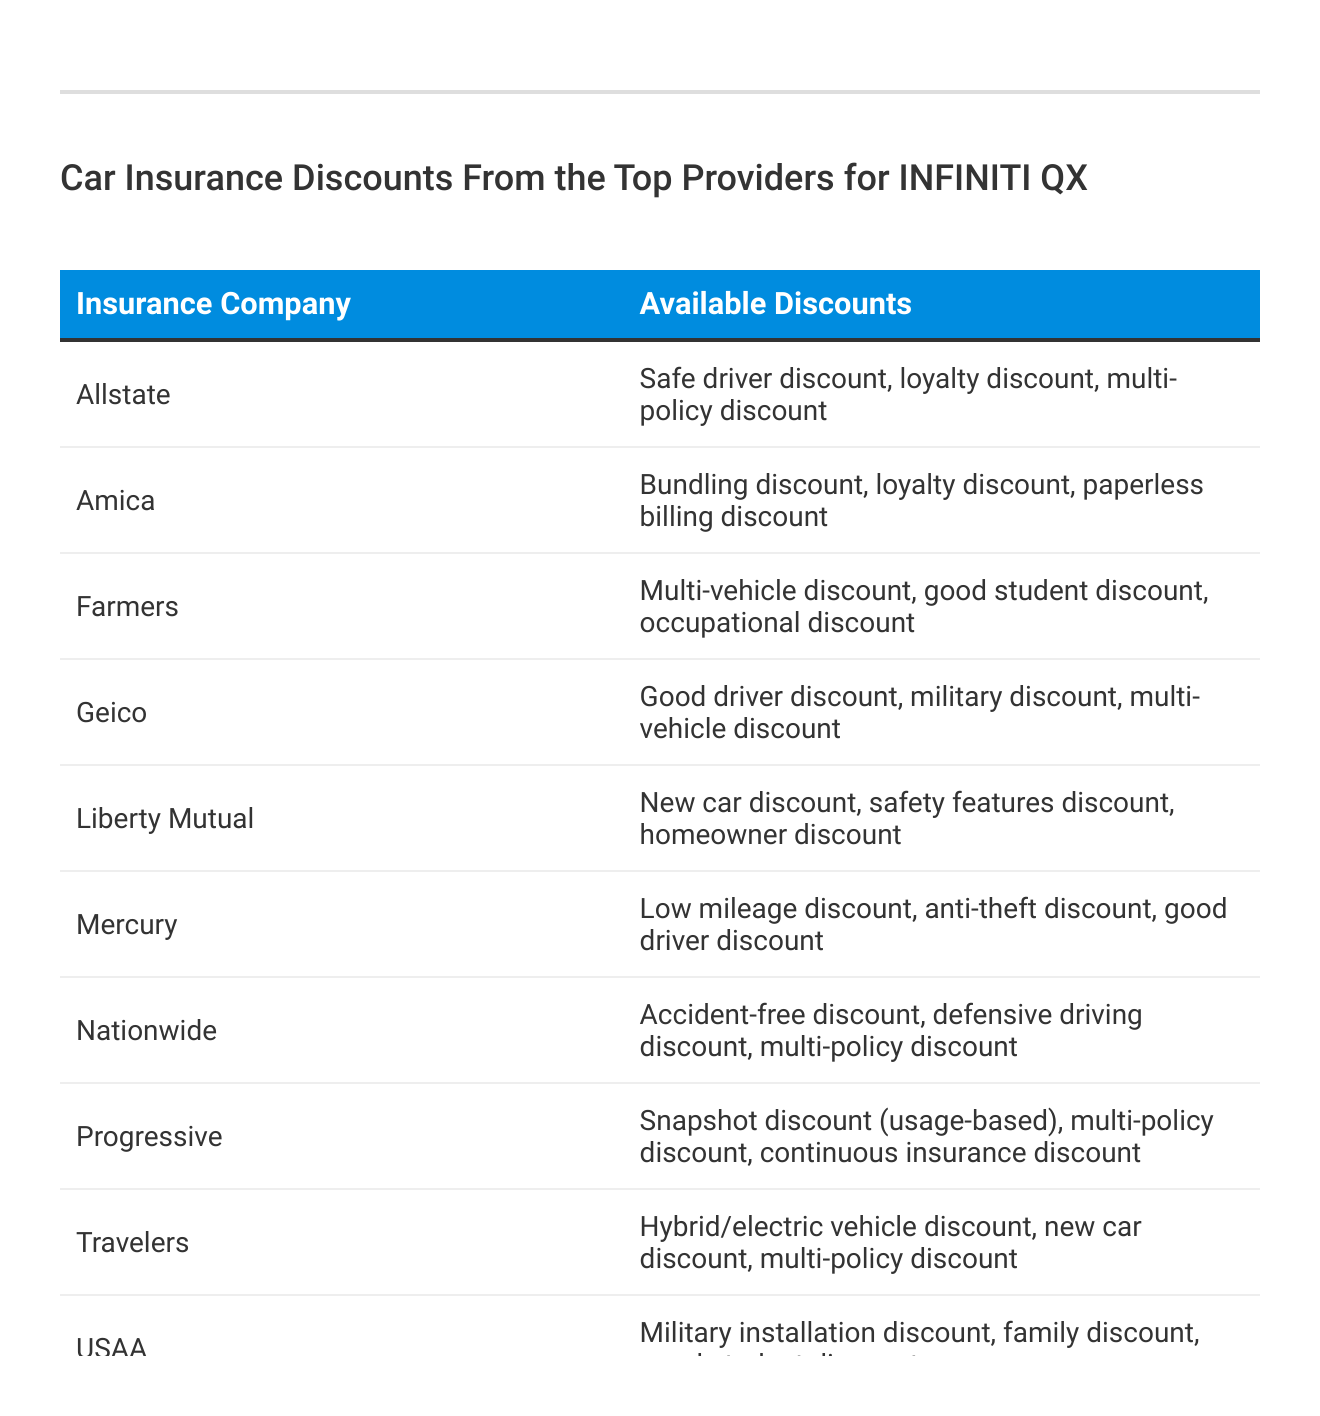 <h3>Car Insurance Discounts From the Top Providers for INFINITI QX</h3>